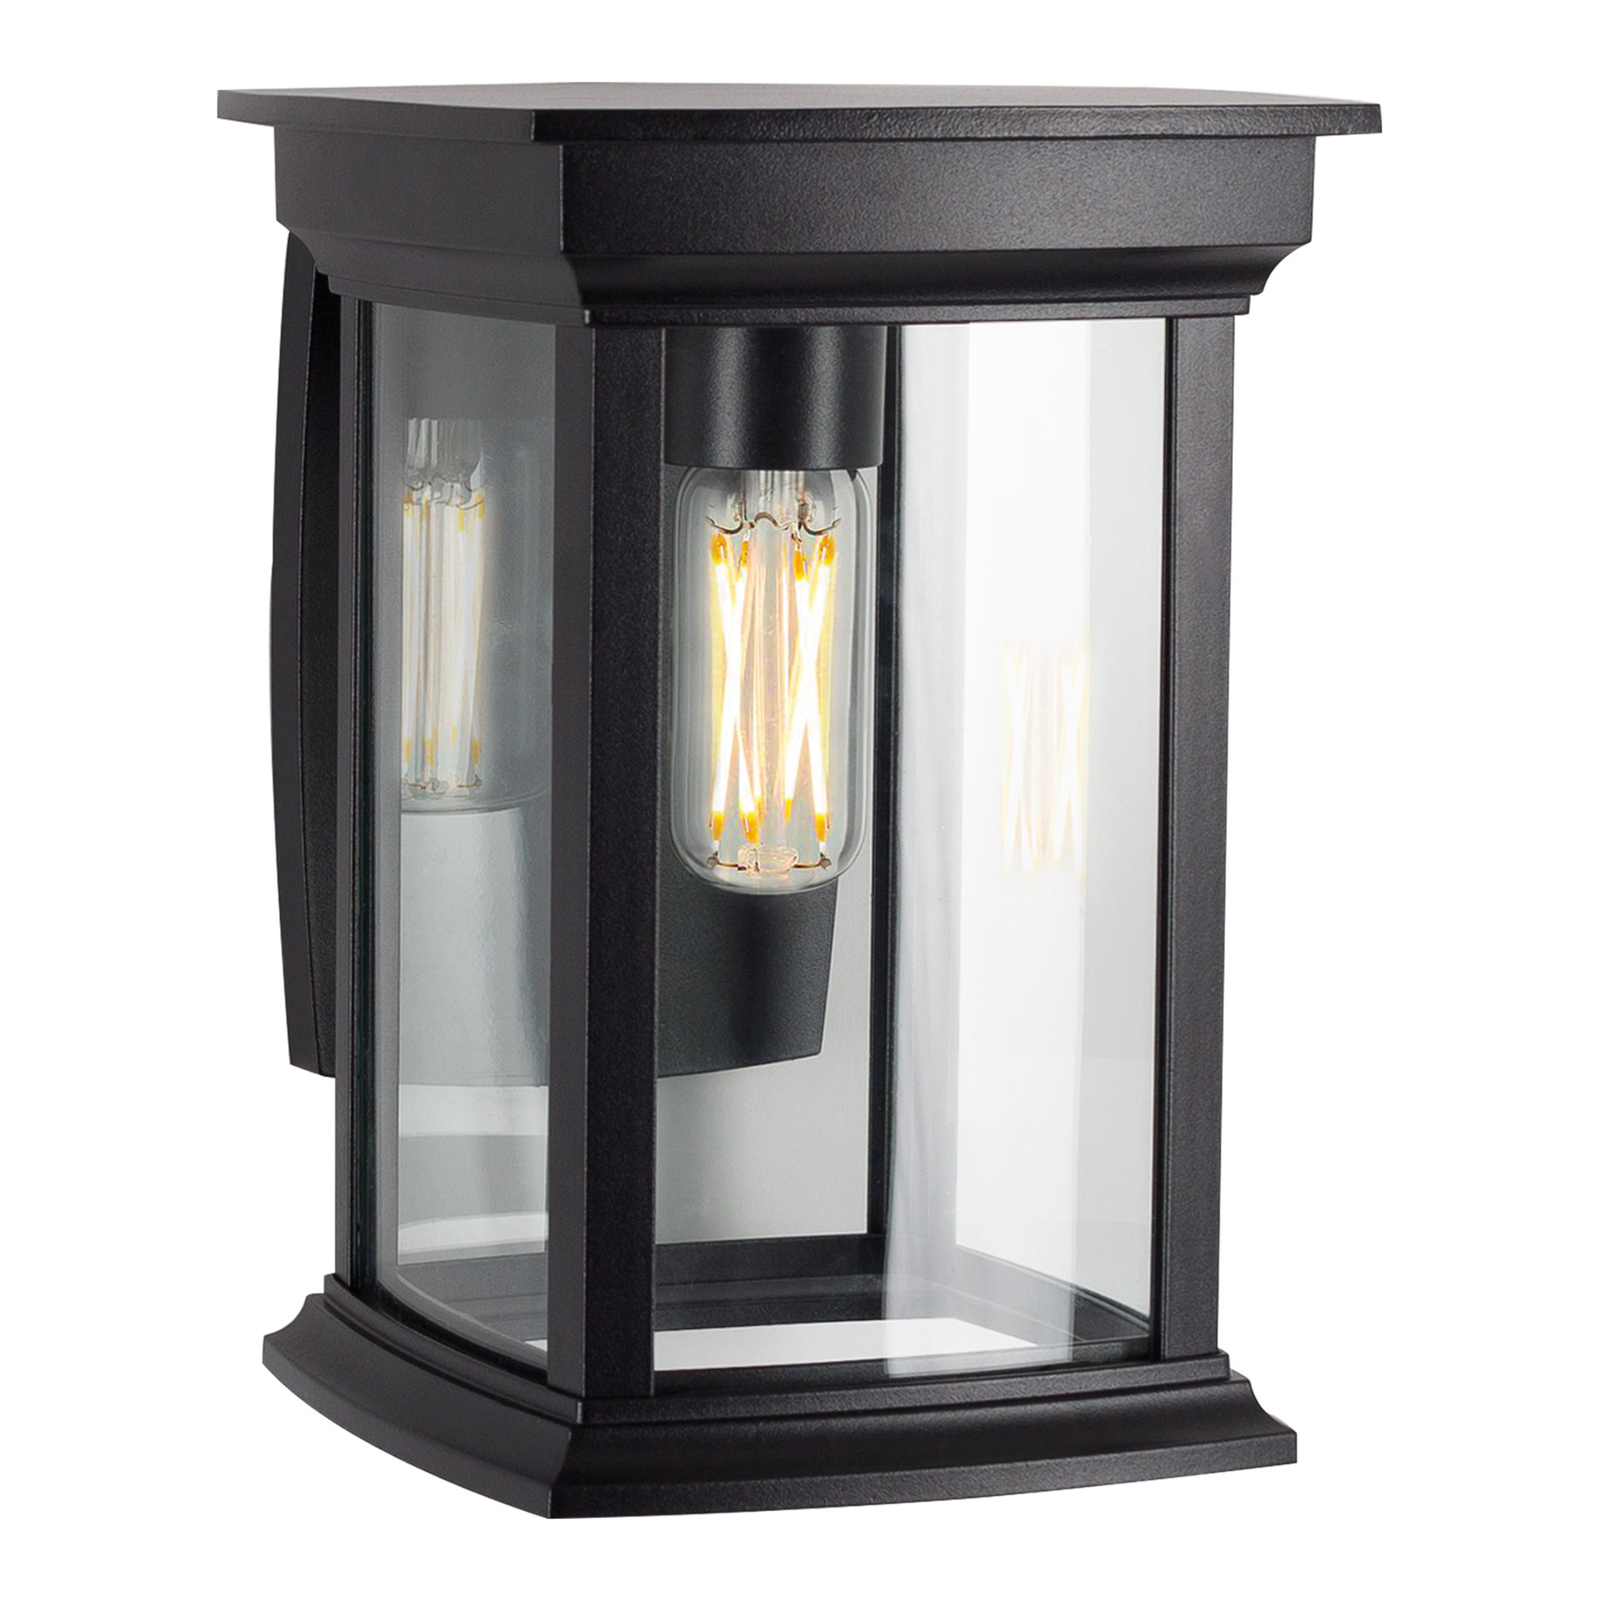 Carlton outdoor wall light with glass shade